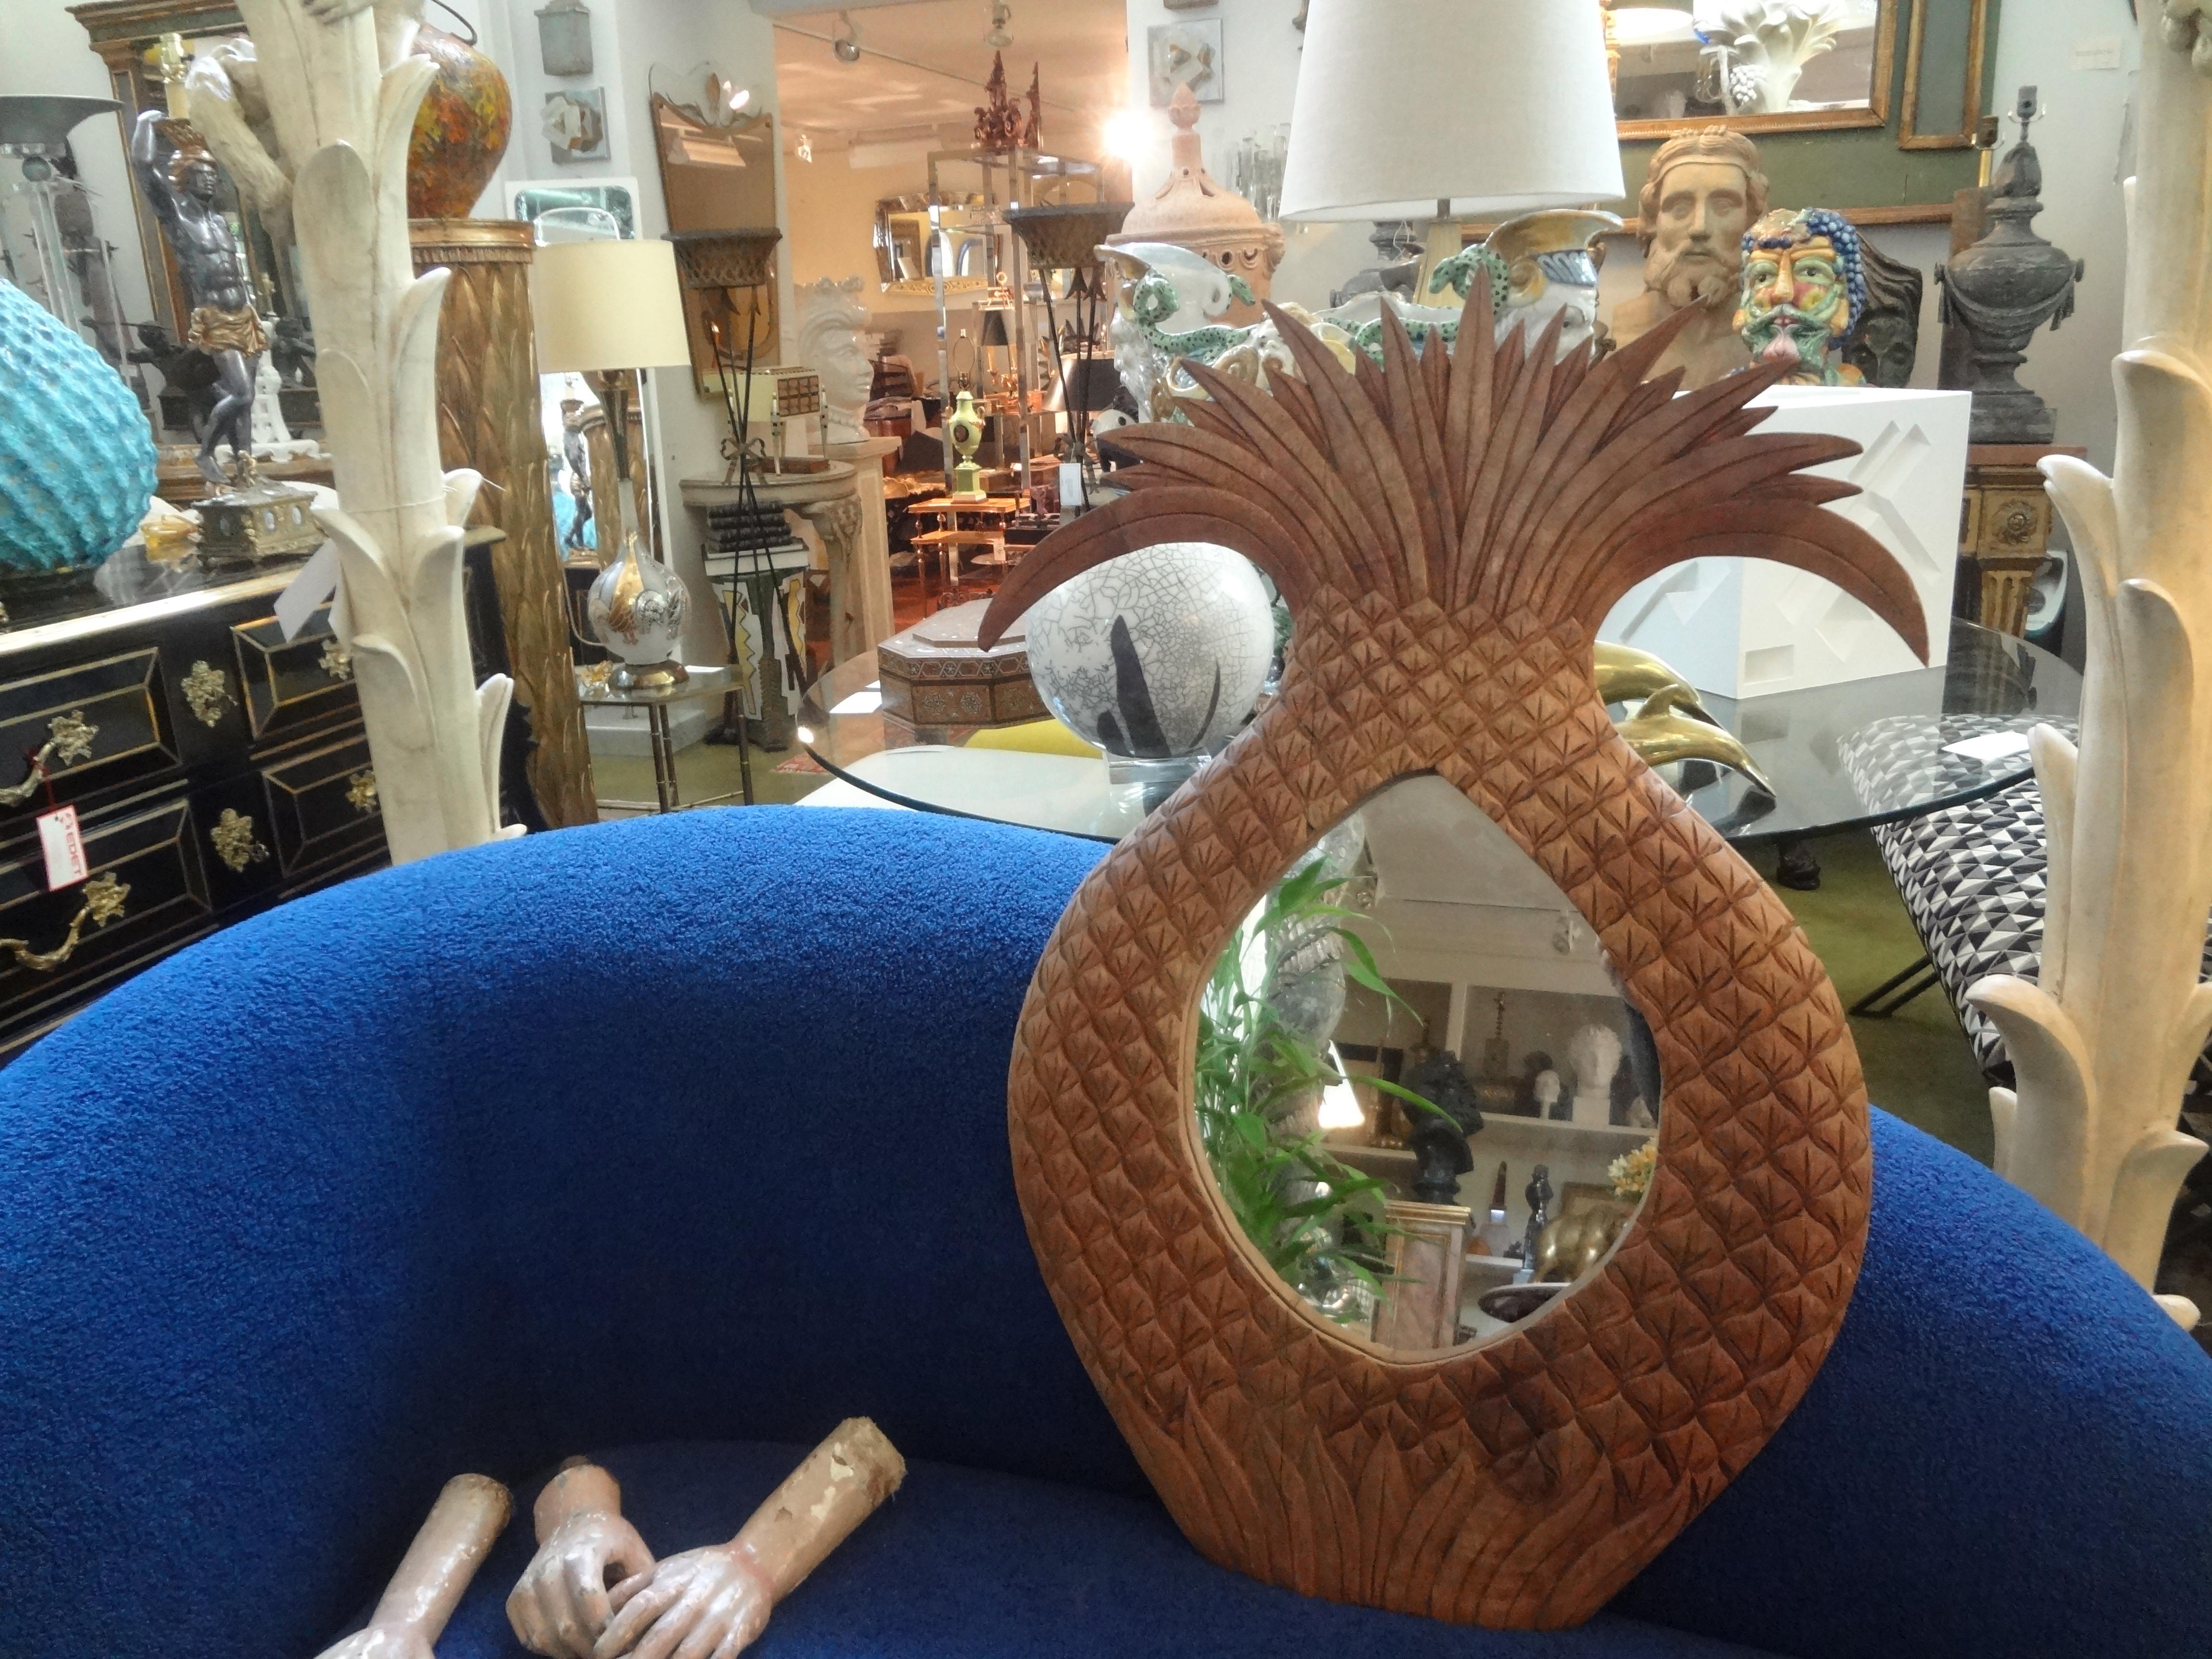 Vintage carved wood pineapple mirror.
Our unusual Hollywood Regency pineapple form mirror is expertly carved to look like a real pineapple. Perfect size for a powder room or dressing room.
Fabulous!!!